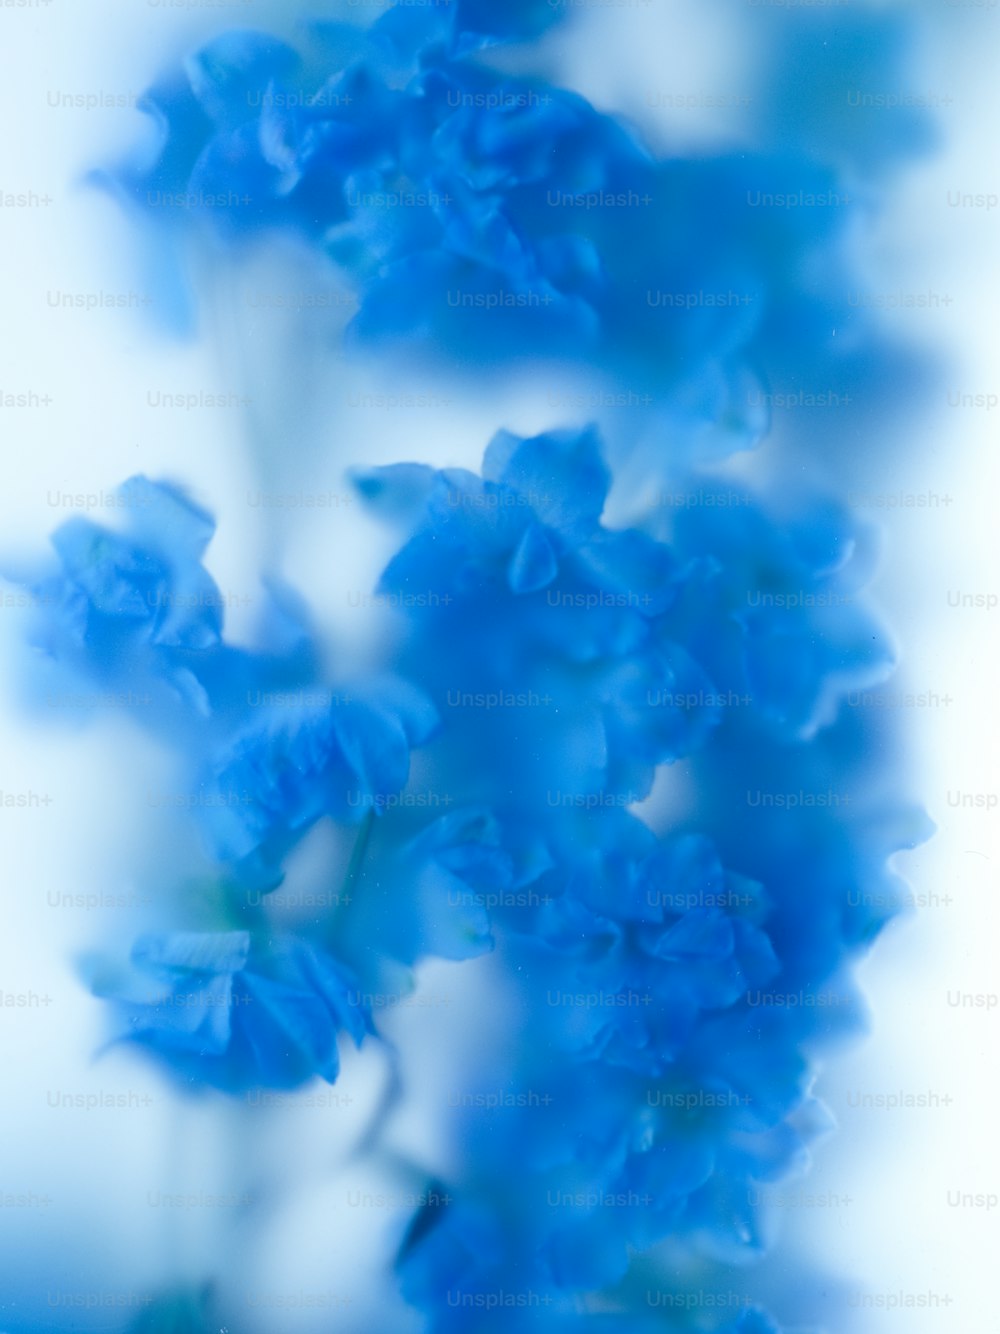 a close up of a blue flower on a white background